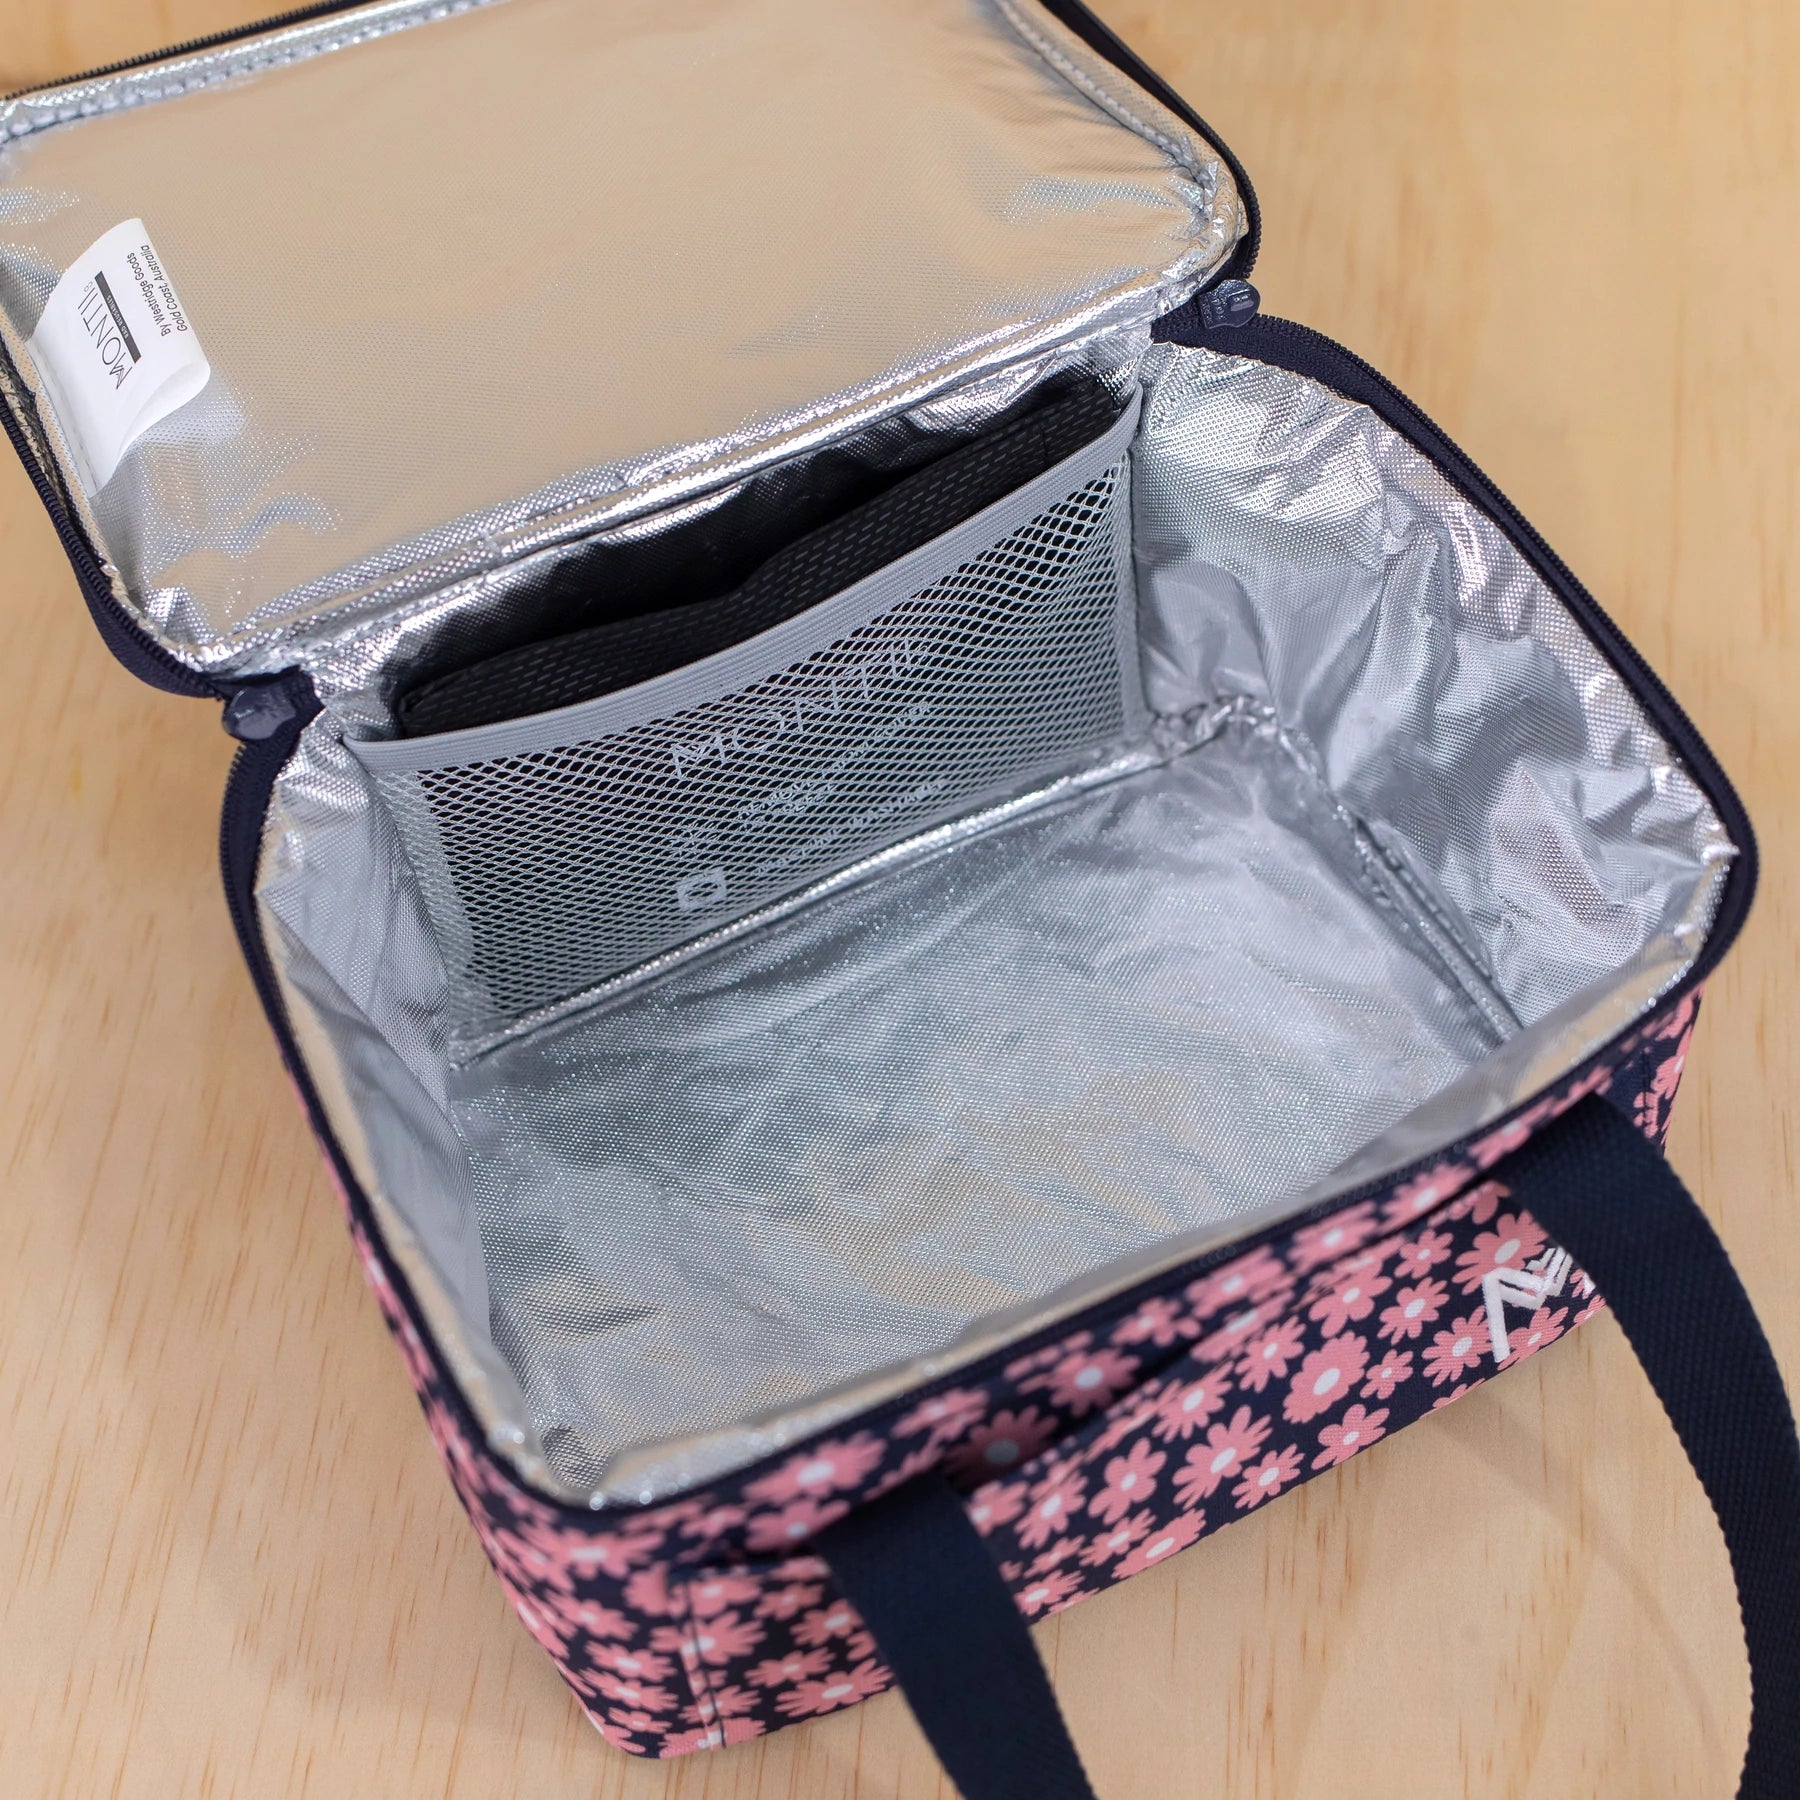 Montii | Insulated Cooler Bag